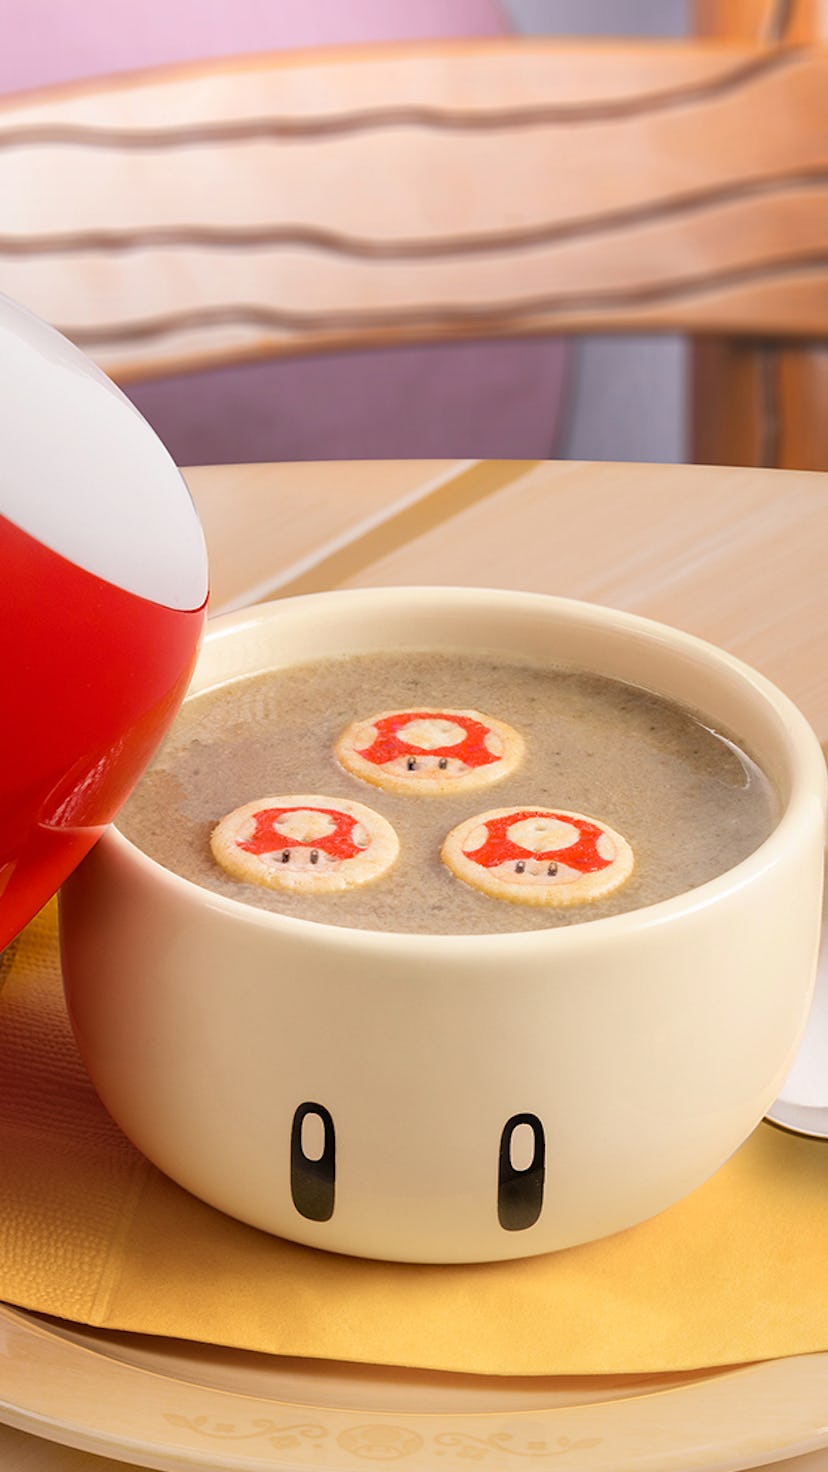 The Super Nintendo World food has a mushroom soup at Toadstool Cafe that is Insta-worthy. 